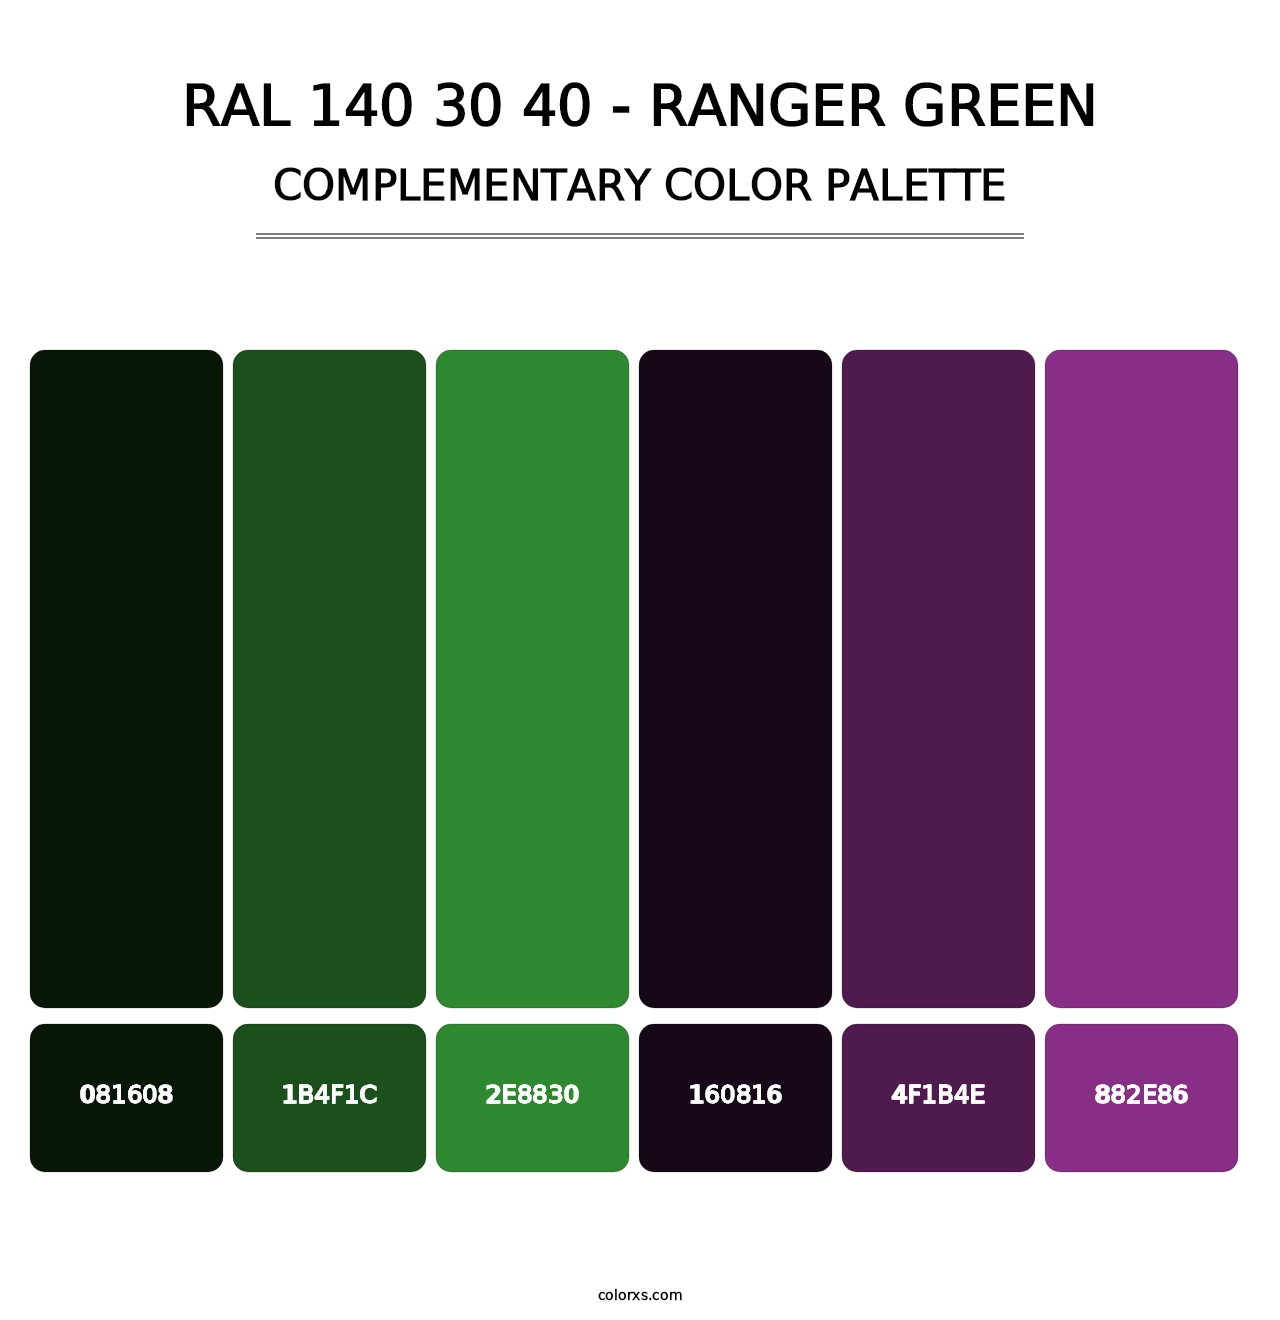 RAL 140 30 40 - Ranger Green - Complementary Color Palette